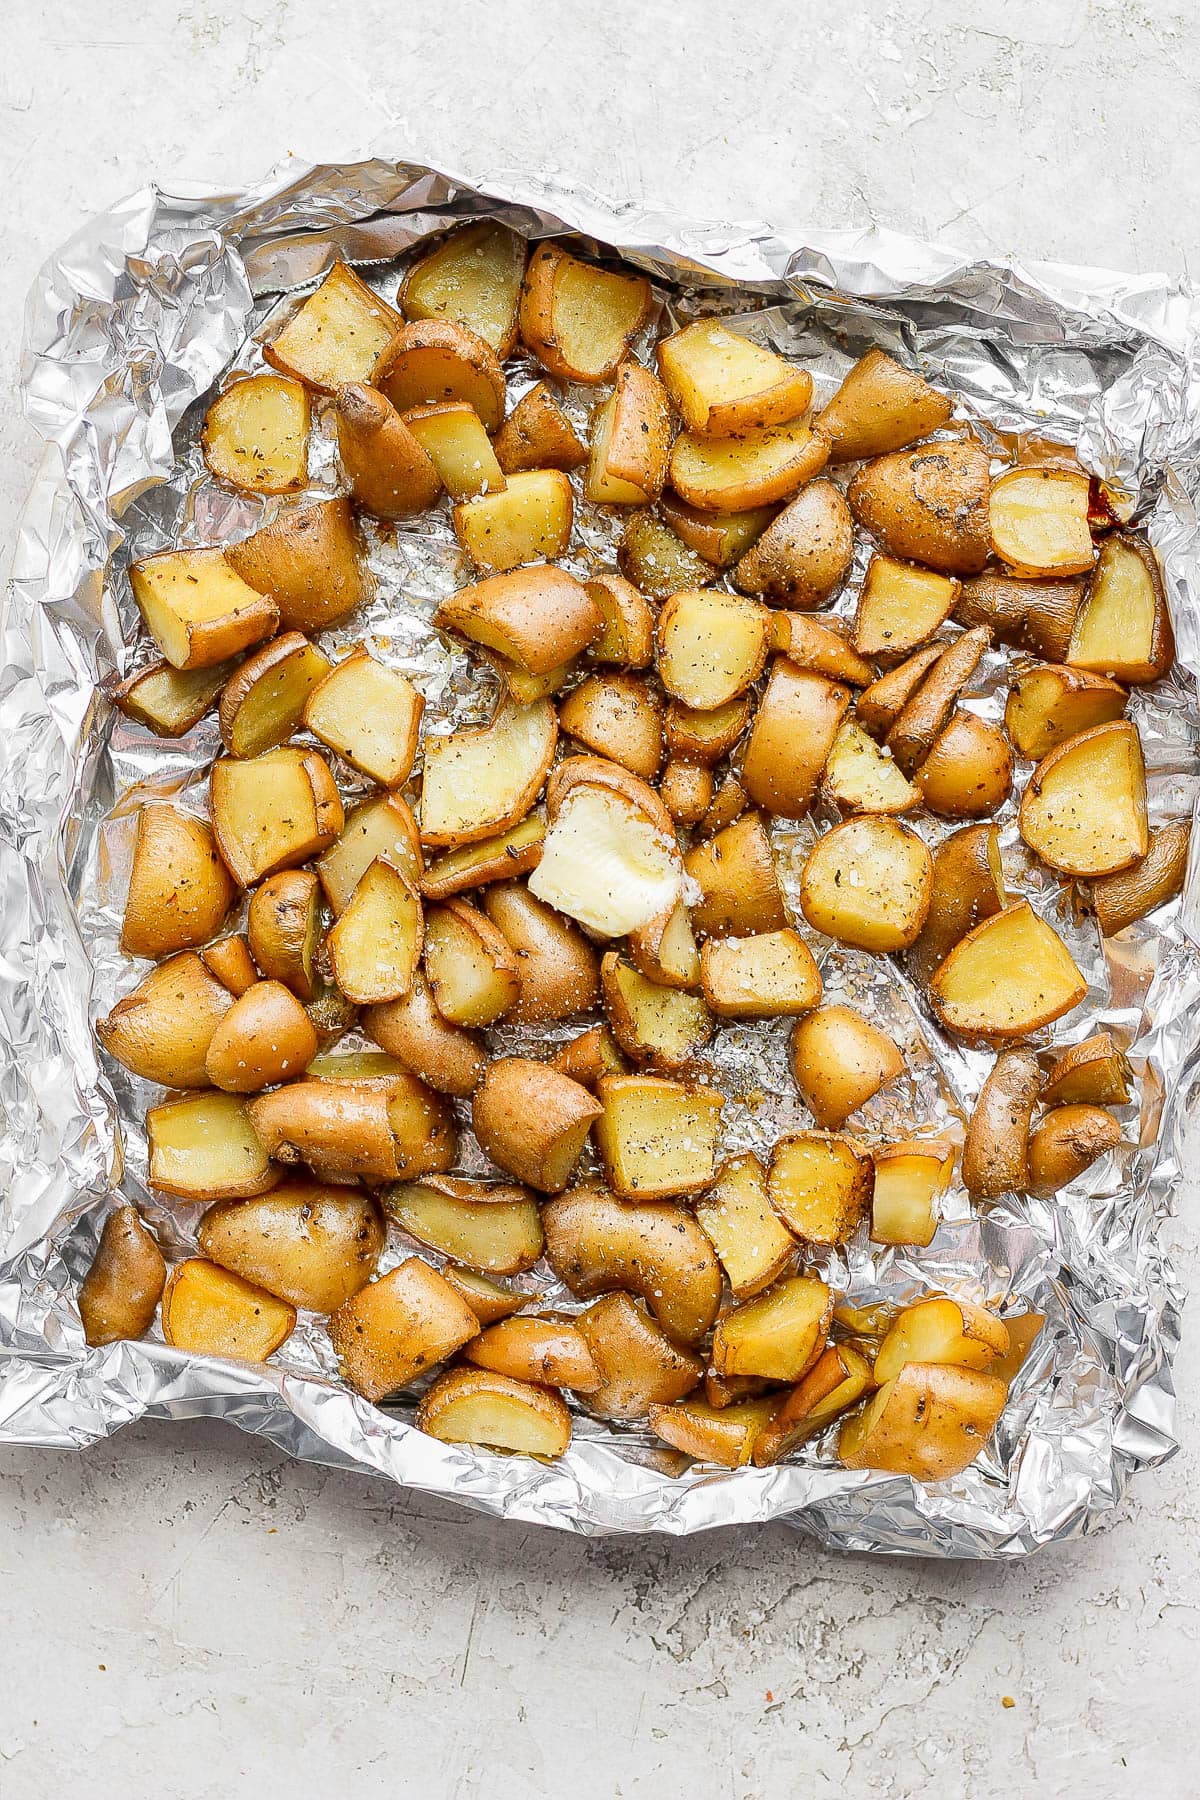 Smoked potatoes in an aluminum foil boat.